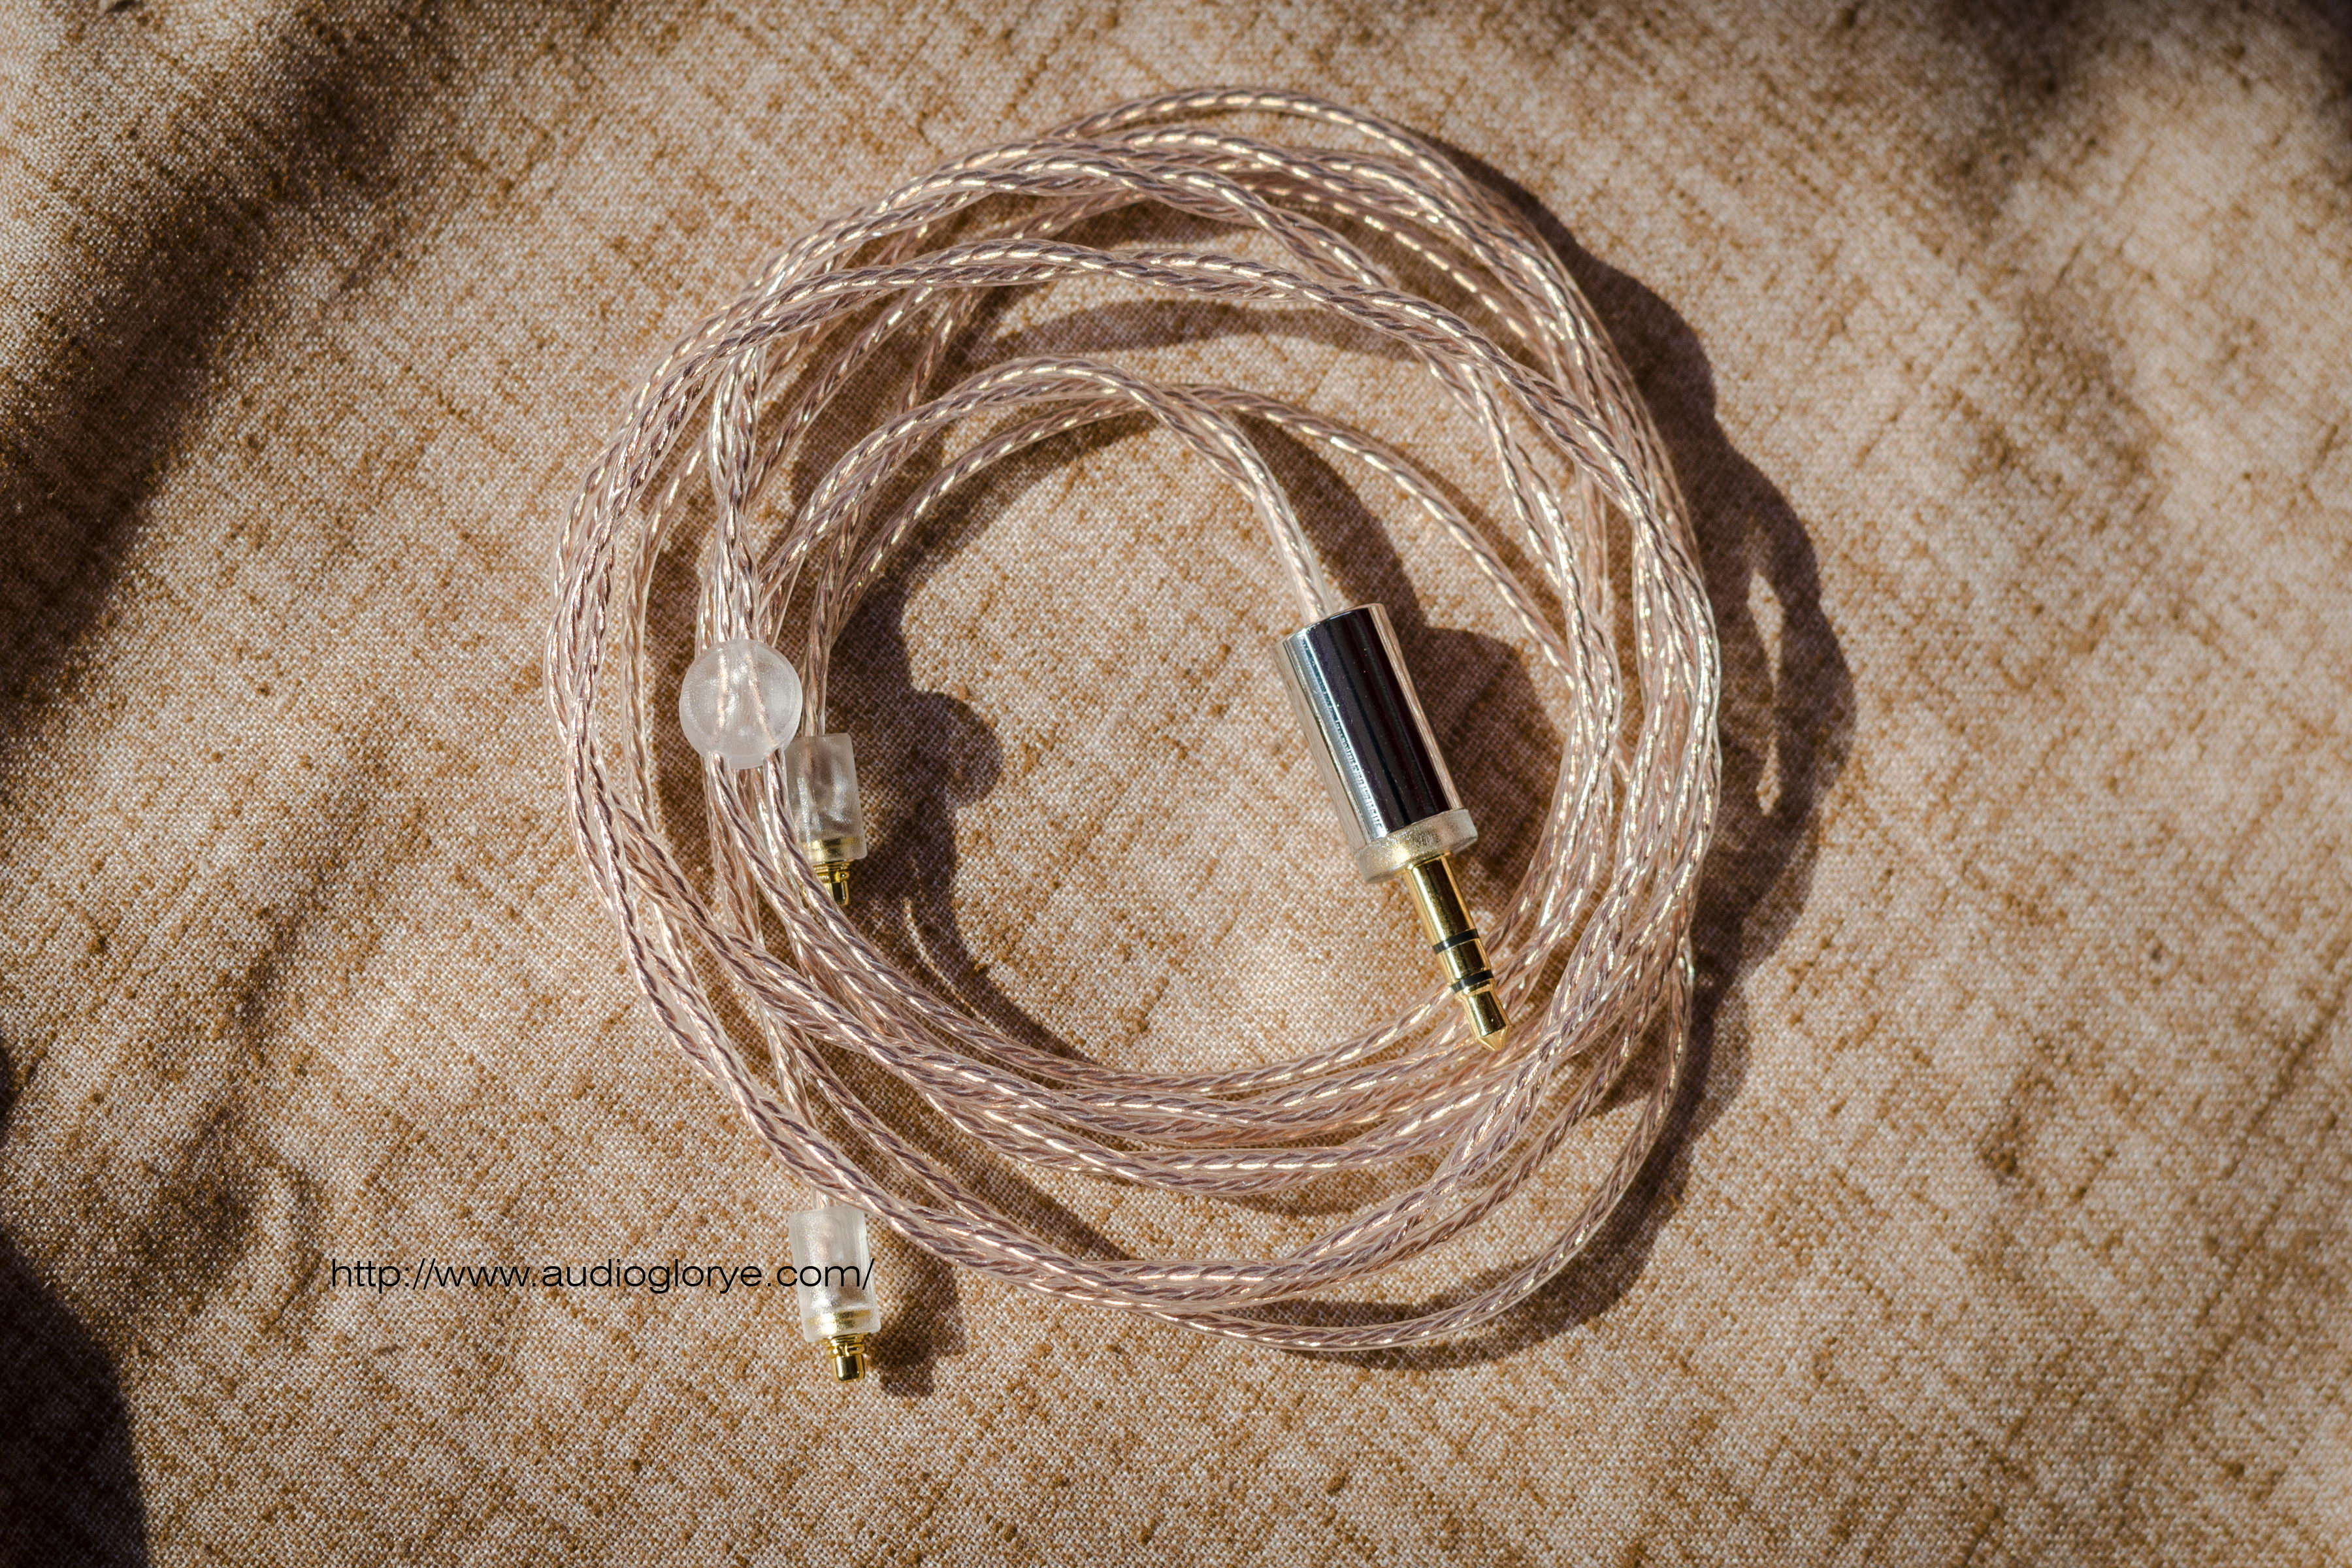 OE Audio 2DUAL OFC cables